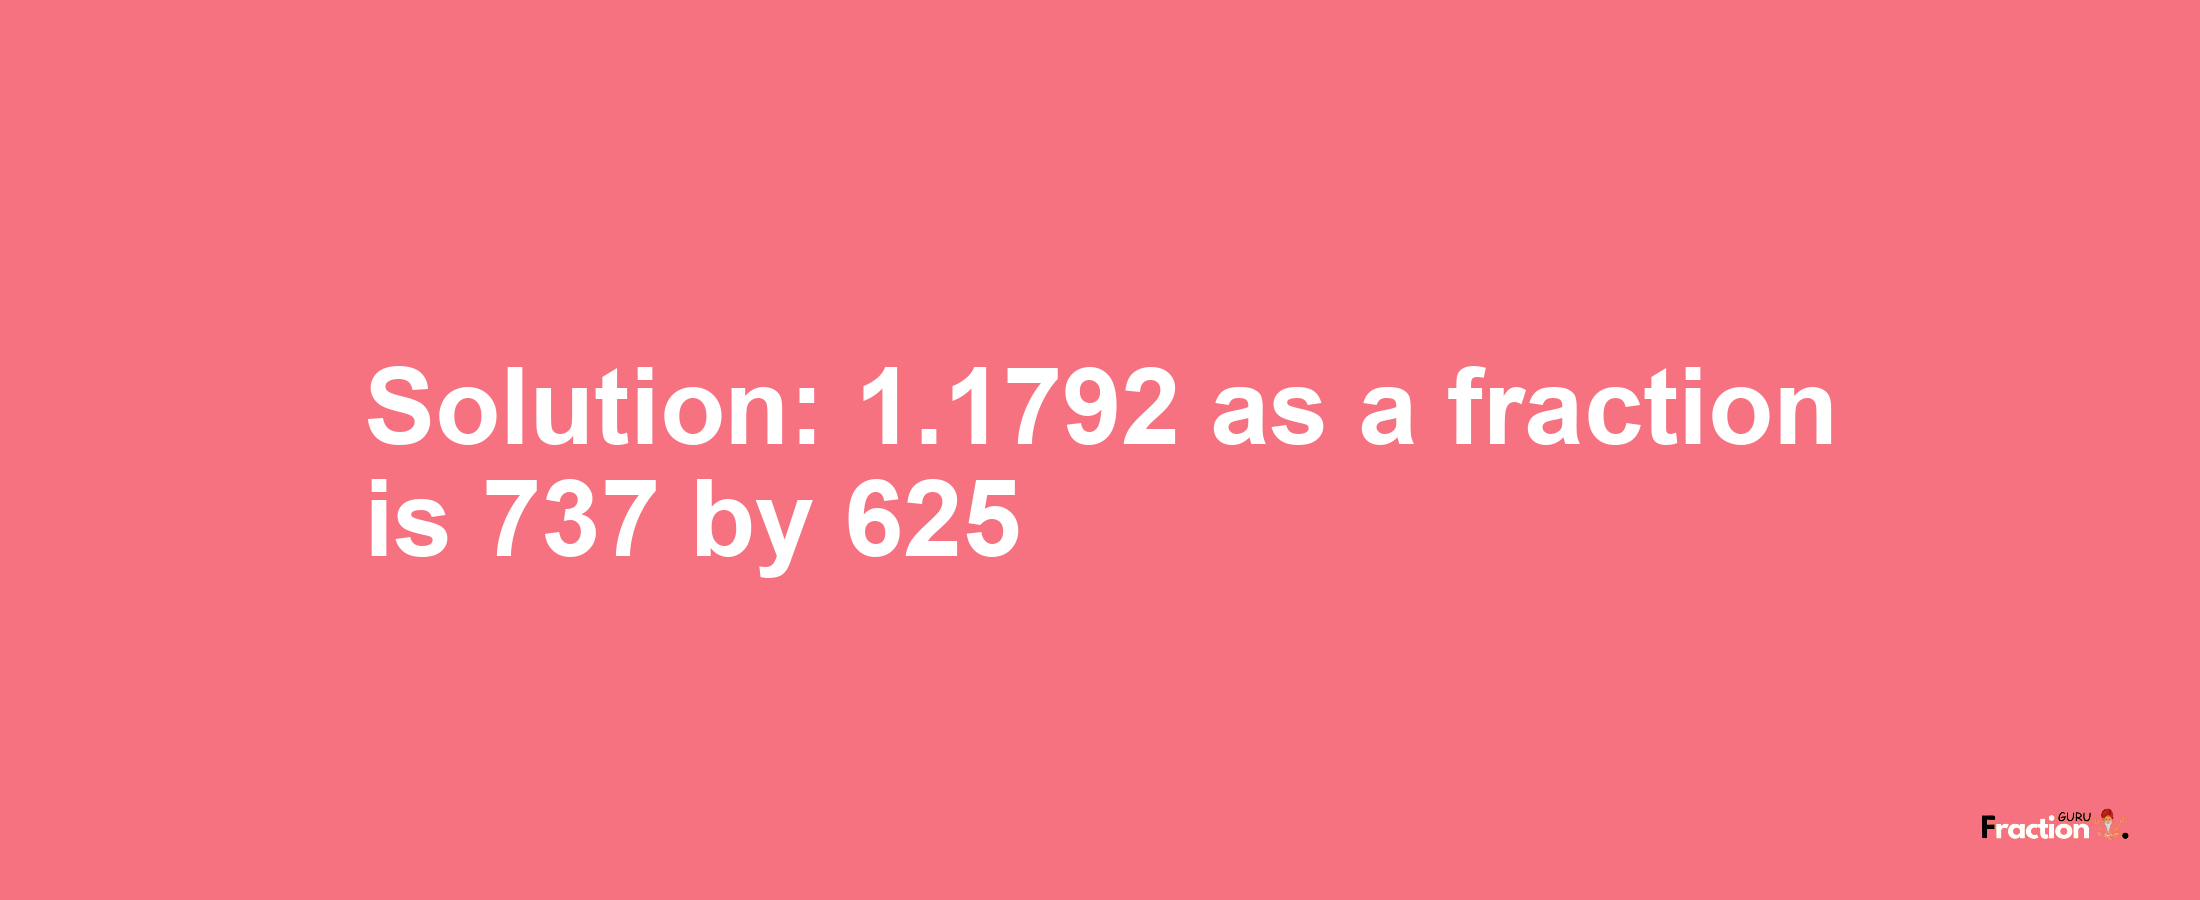 Solution:1.1792 as a fraction is 737/625